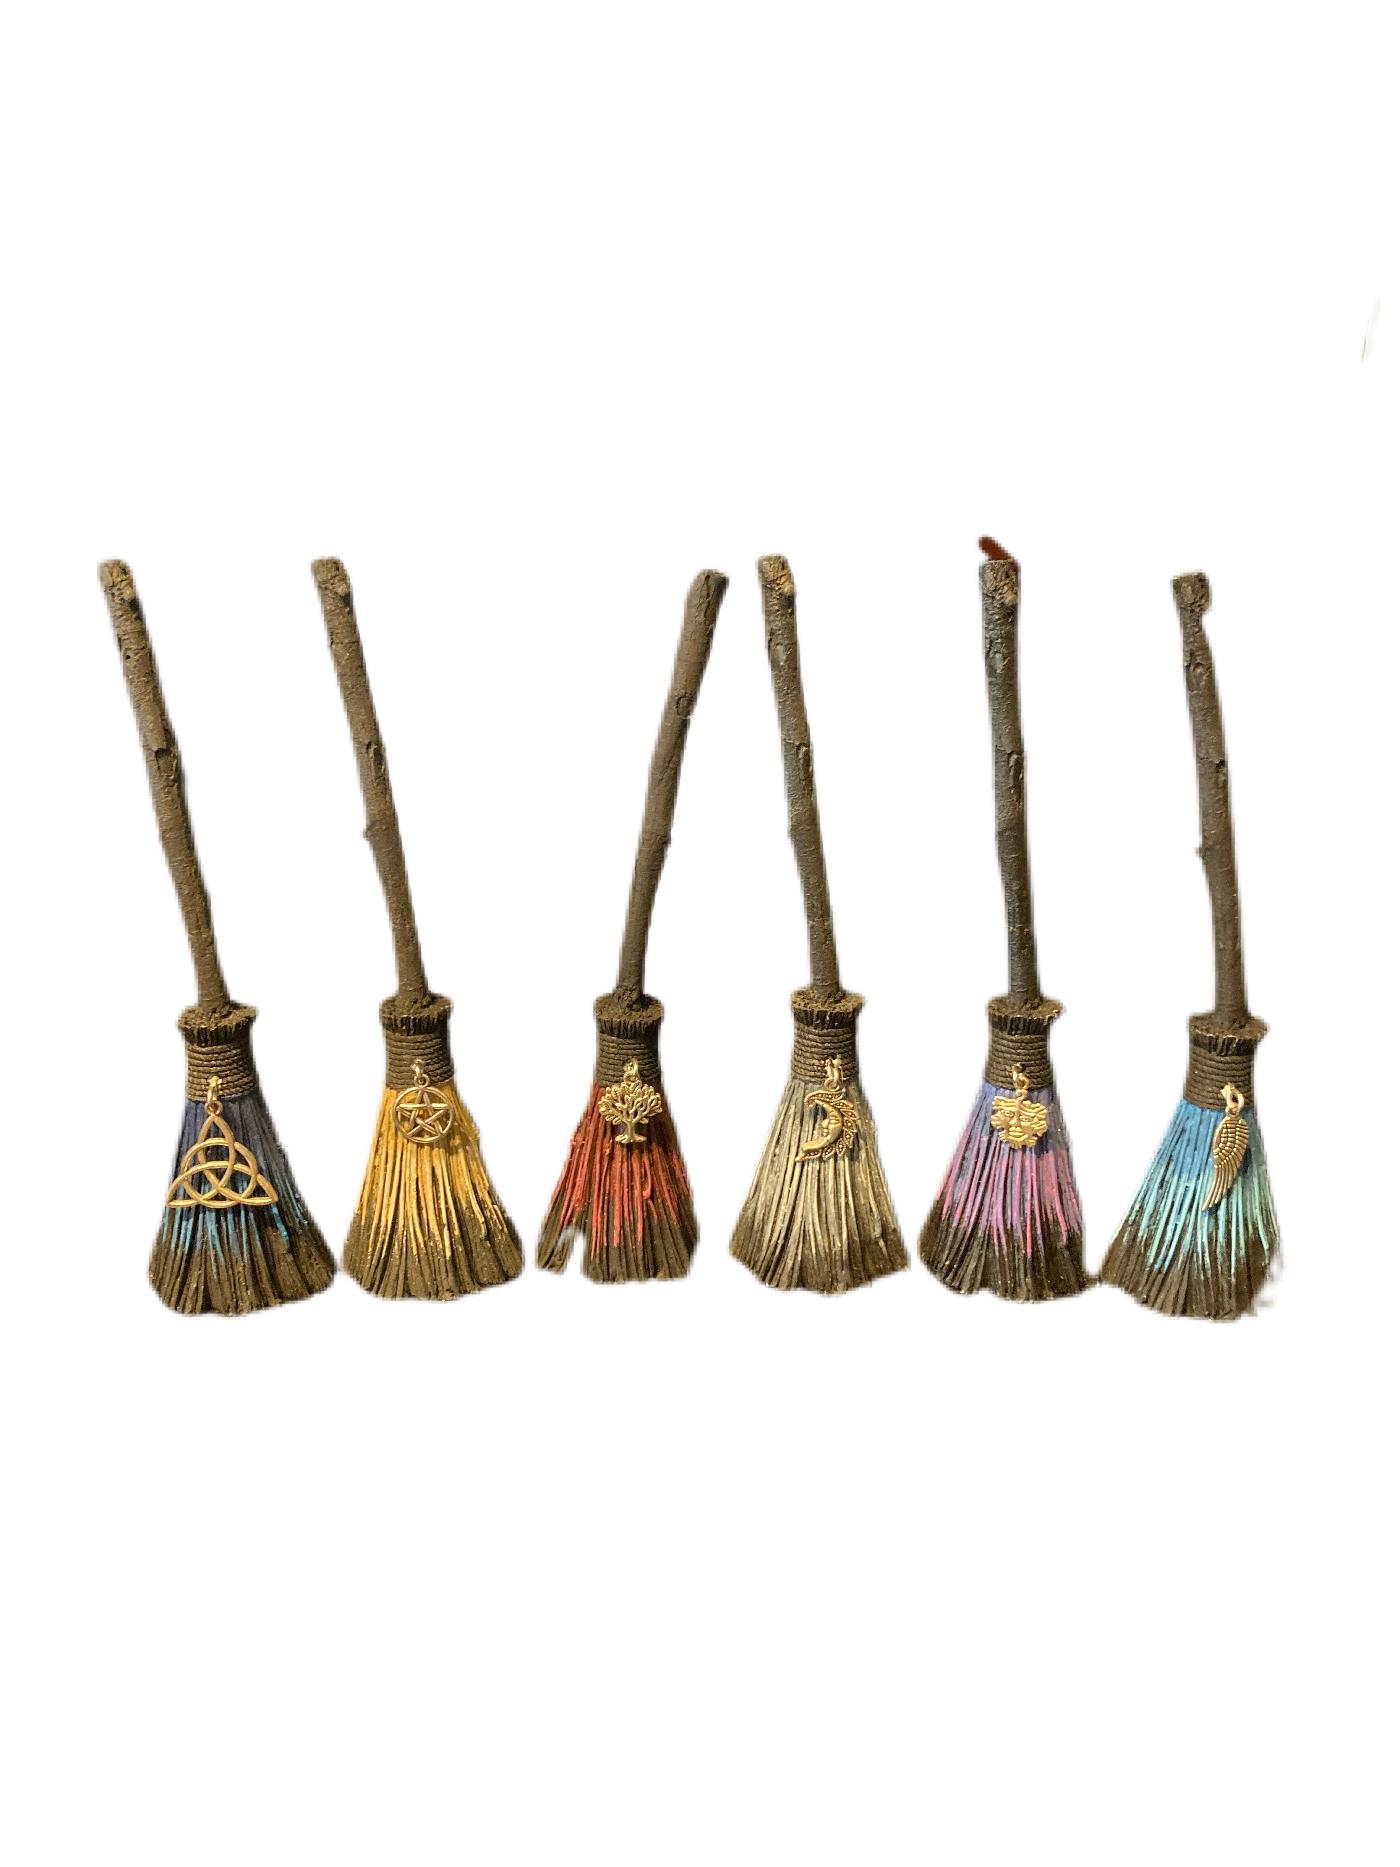 Positivity Broomsticks by Nemesis Now set of 6 